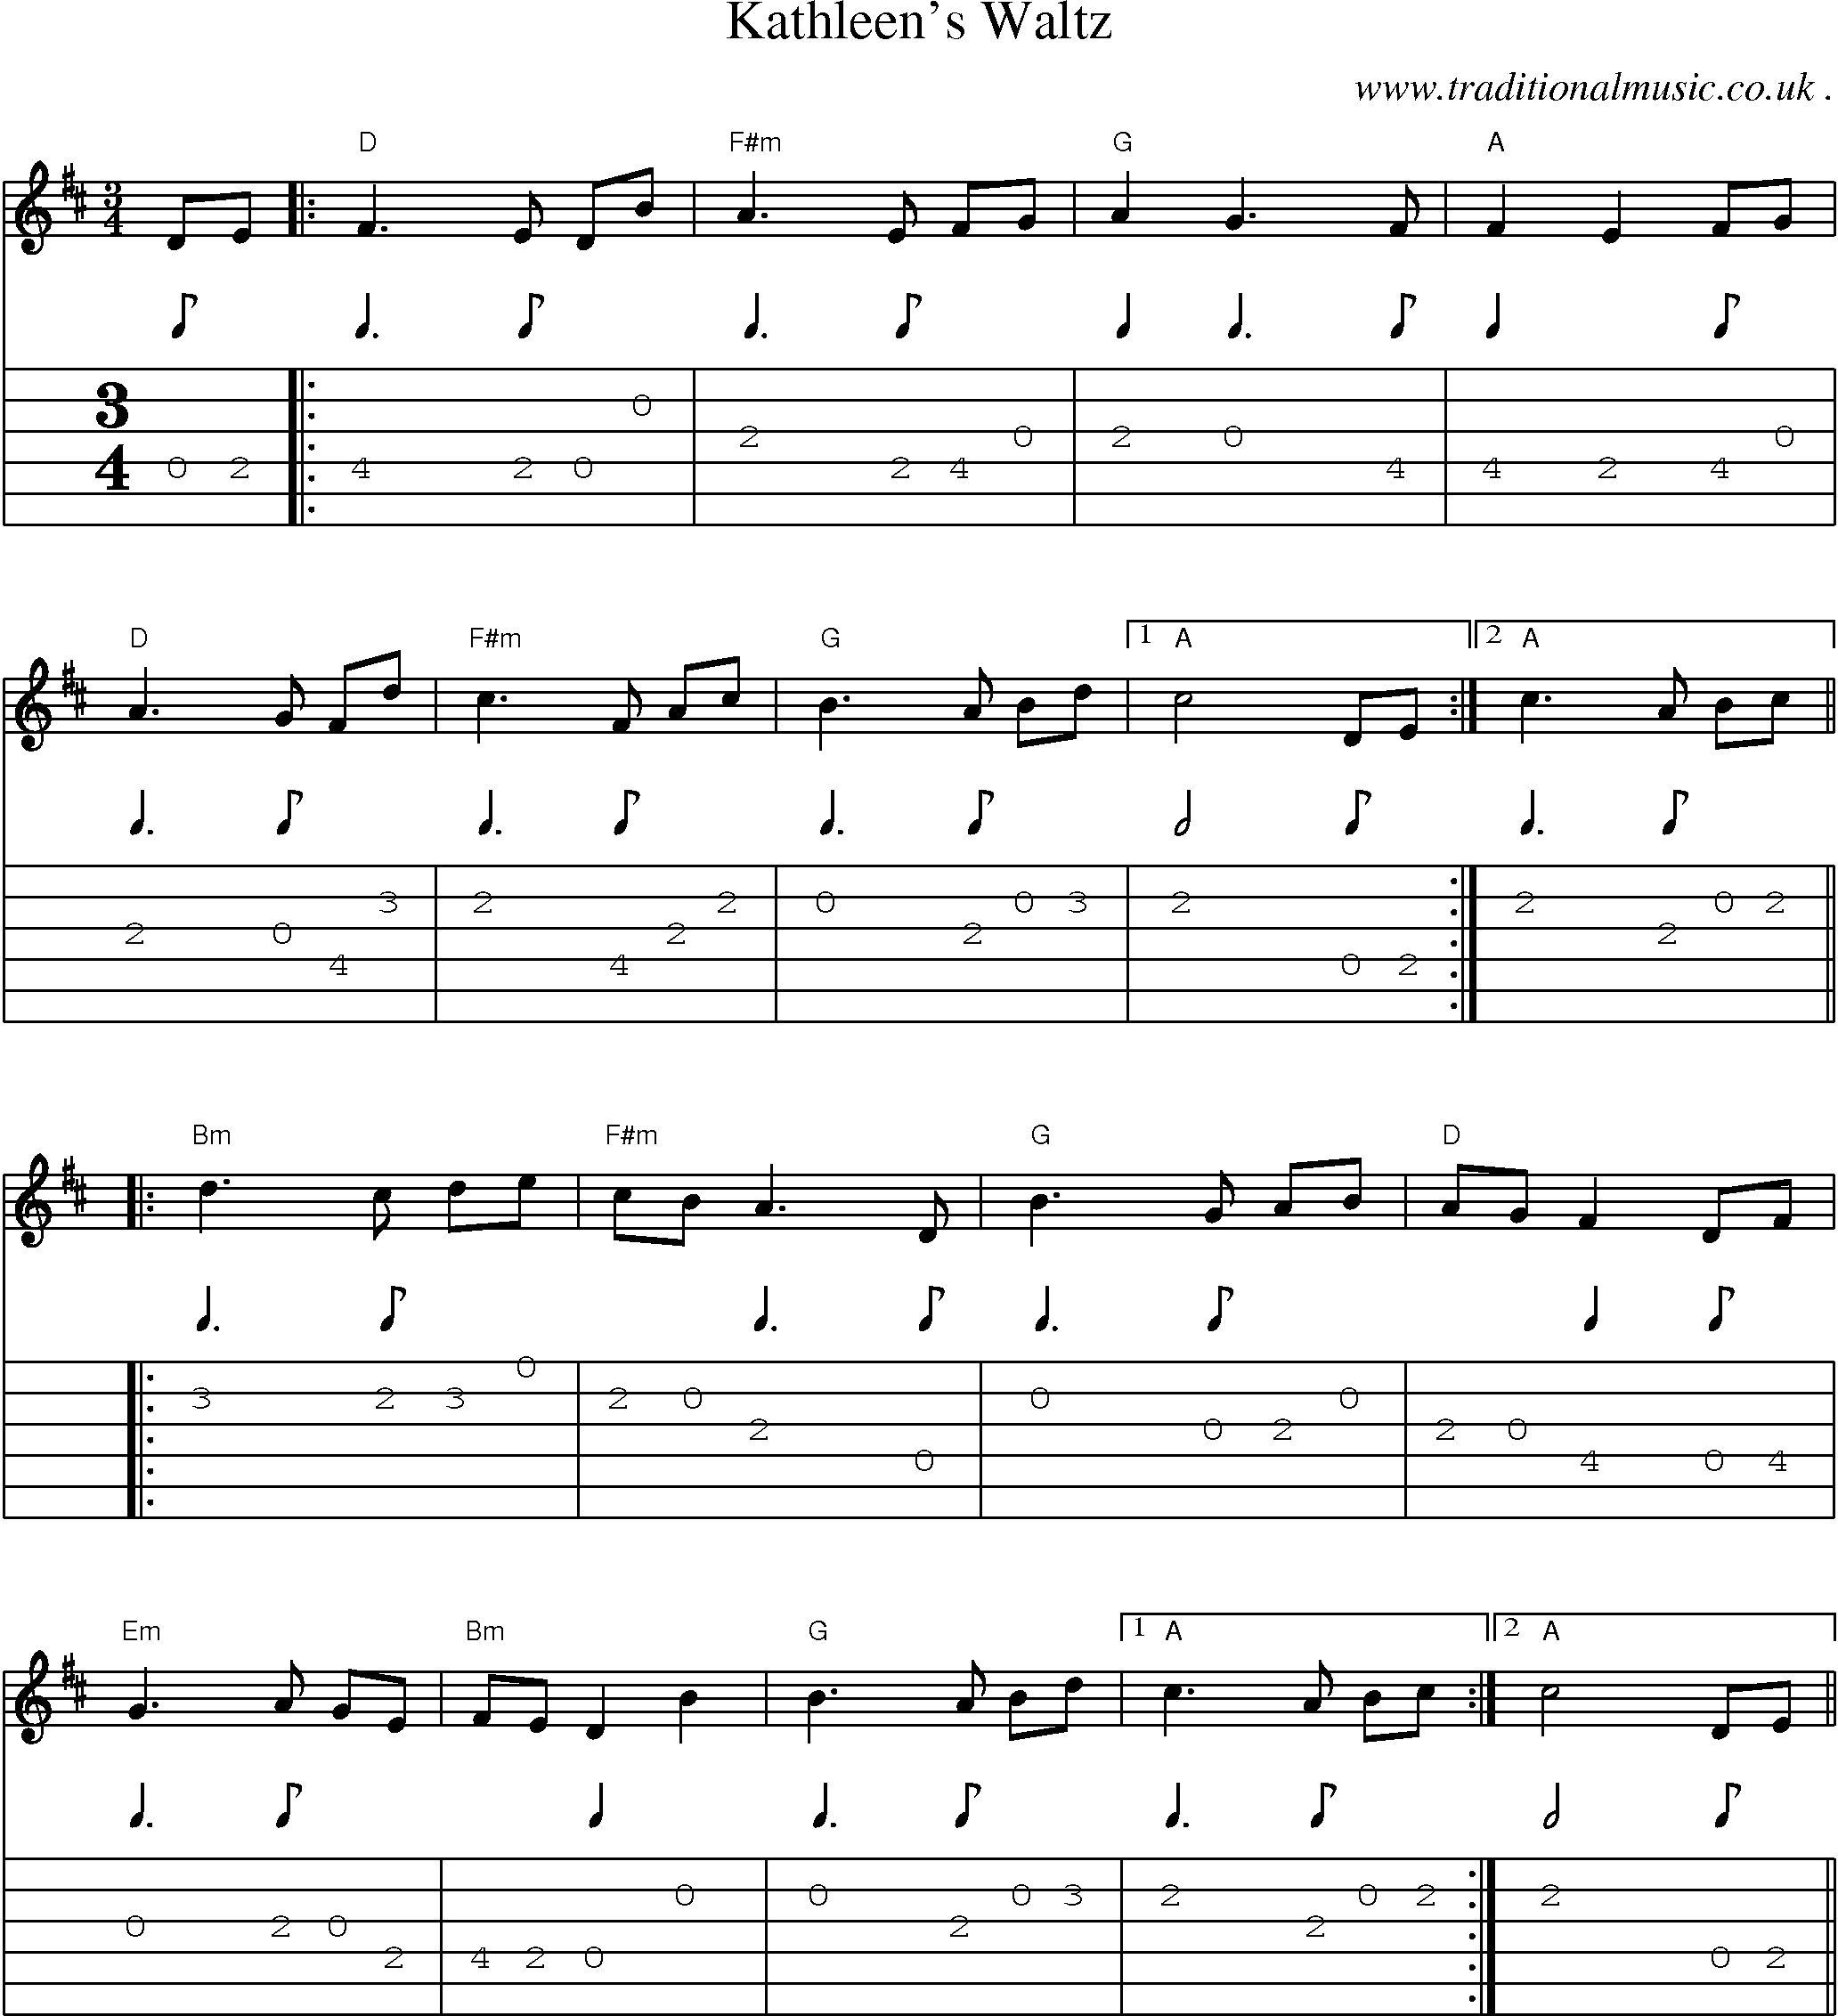 Sheet-Music and Guitar Tabs for Kathleens Waltz